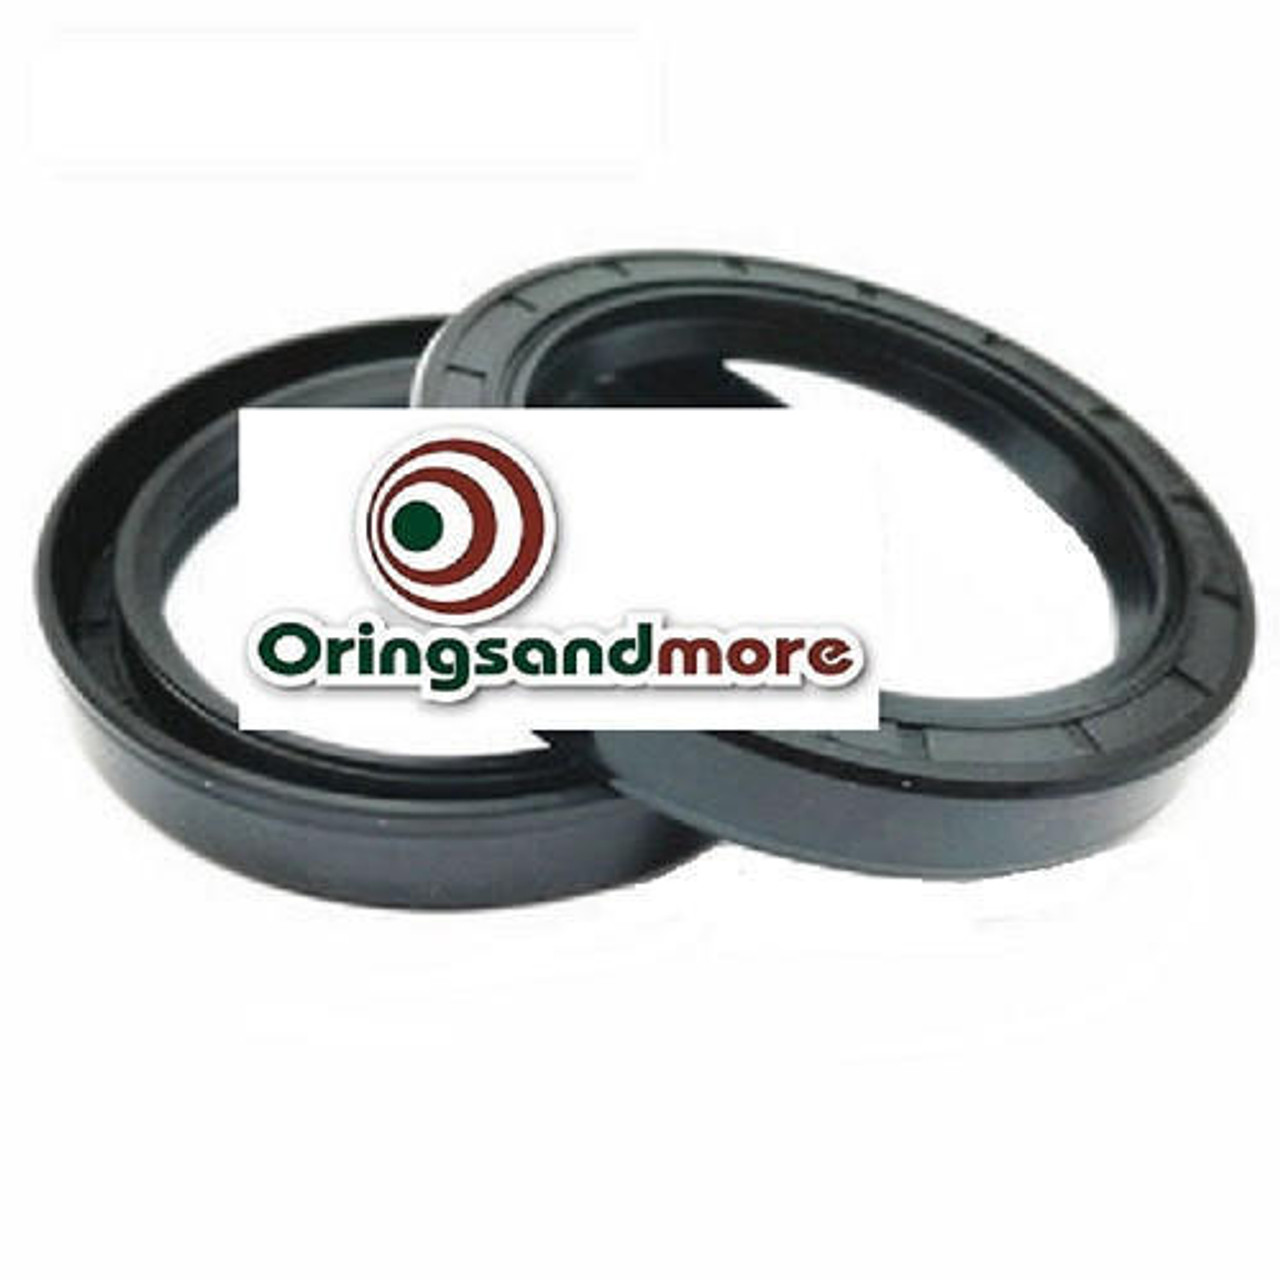 Metric Oil Shaft Seal 27 x 47 x 10mm Double Lip Price for 1 pc